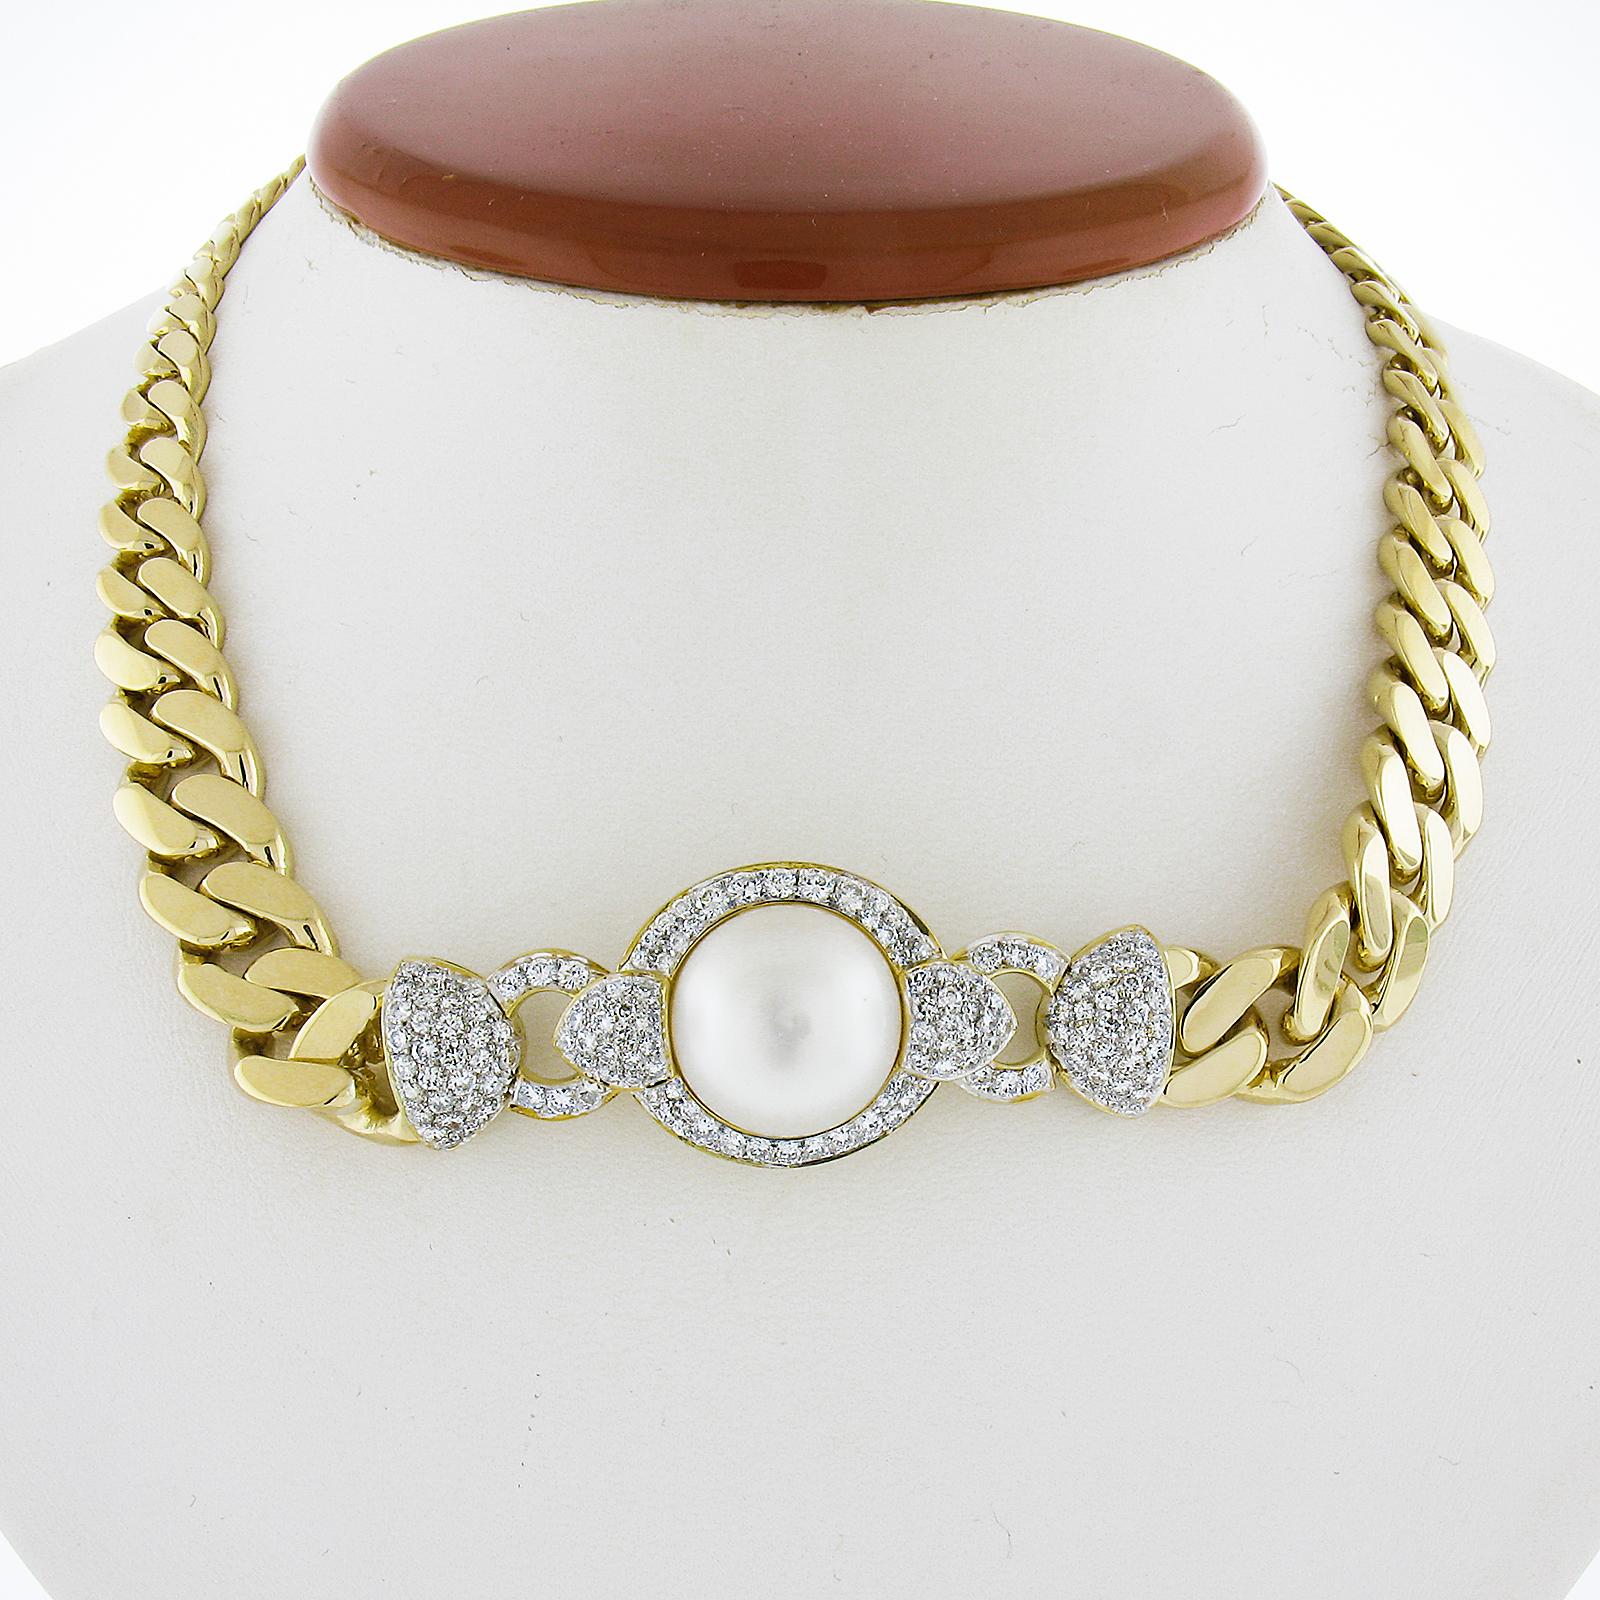 Item Details (Necklace)
--Stone(s):--
(1) Genuine Cultured South Sea Pearl - Round Shape - Nice white Color - Nice Luster - 16.7mm (approx.)
Numerous Natural Genuine Diamonds - Round Brilliant Cut - Pave Set - G-I Color - VS1/VS2 Clarity

Material: